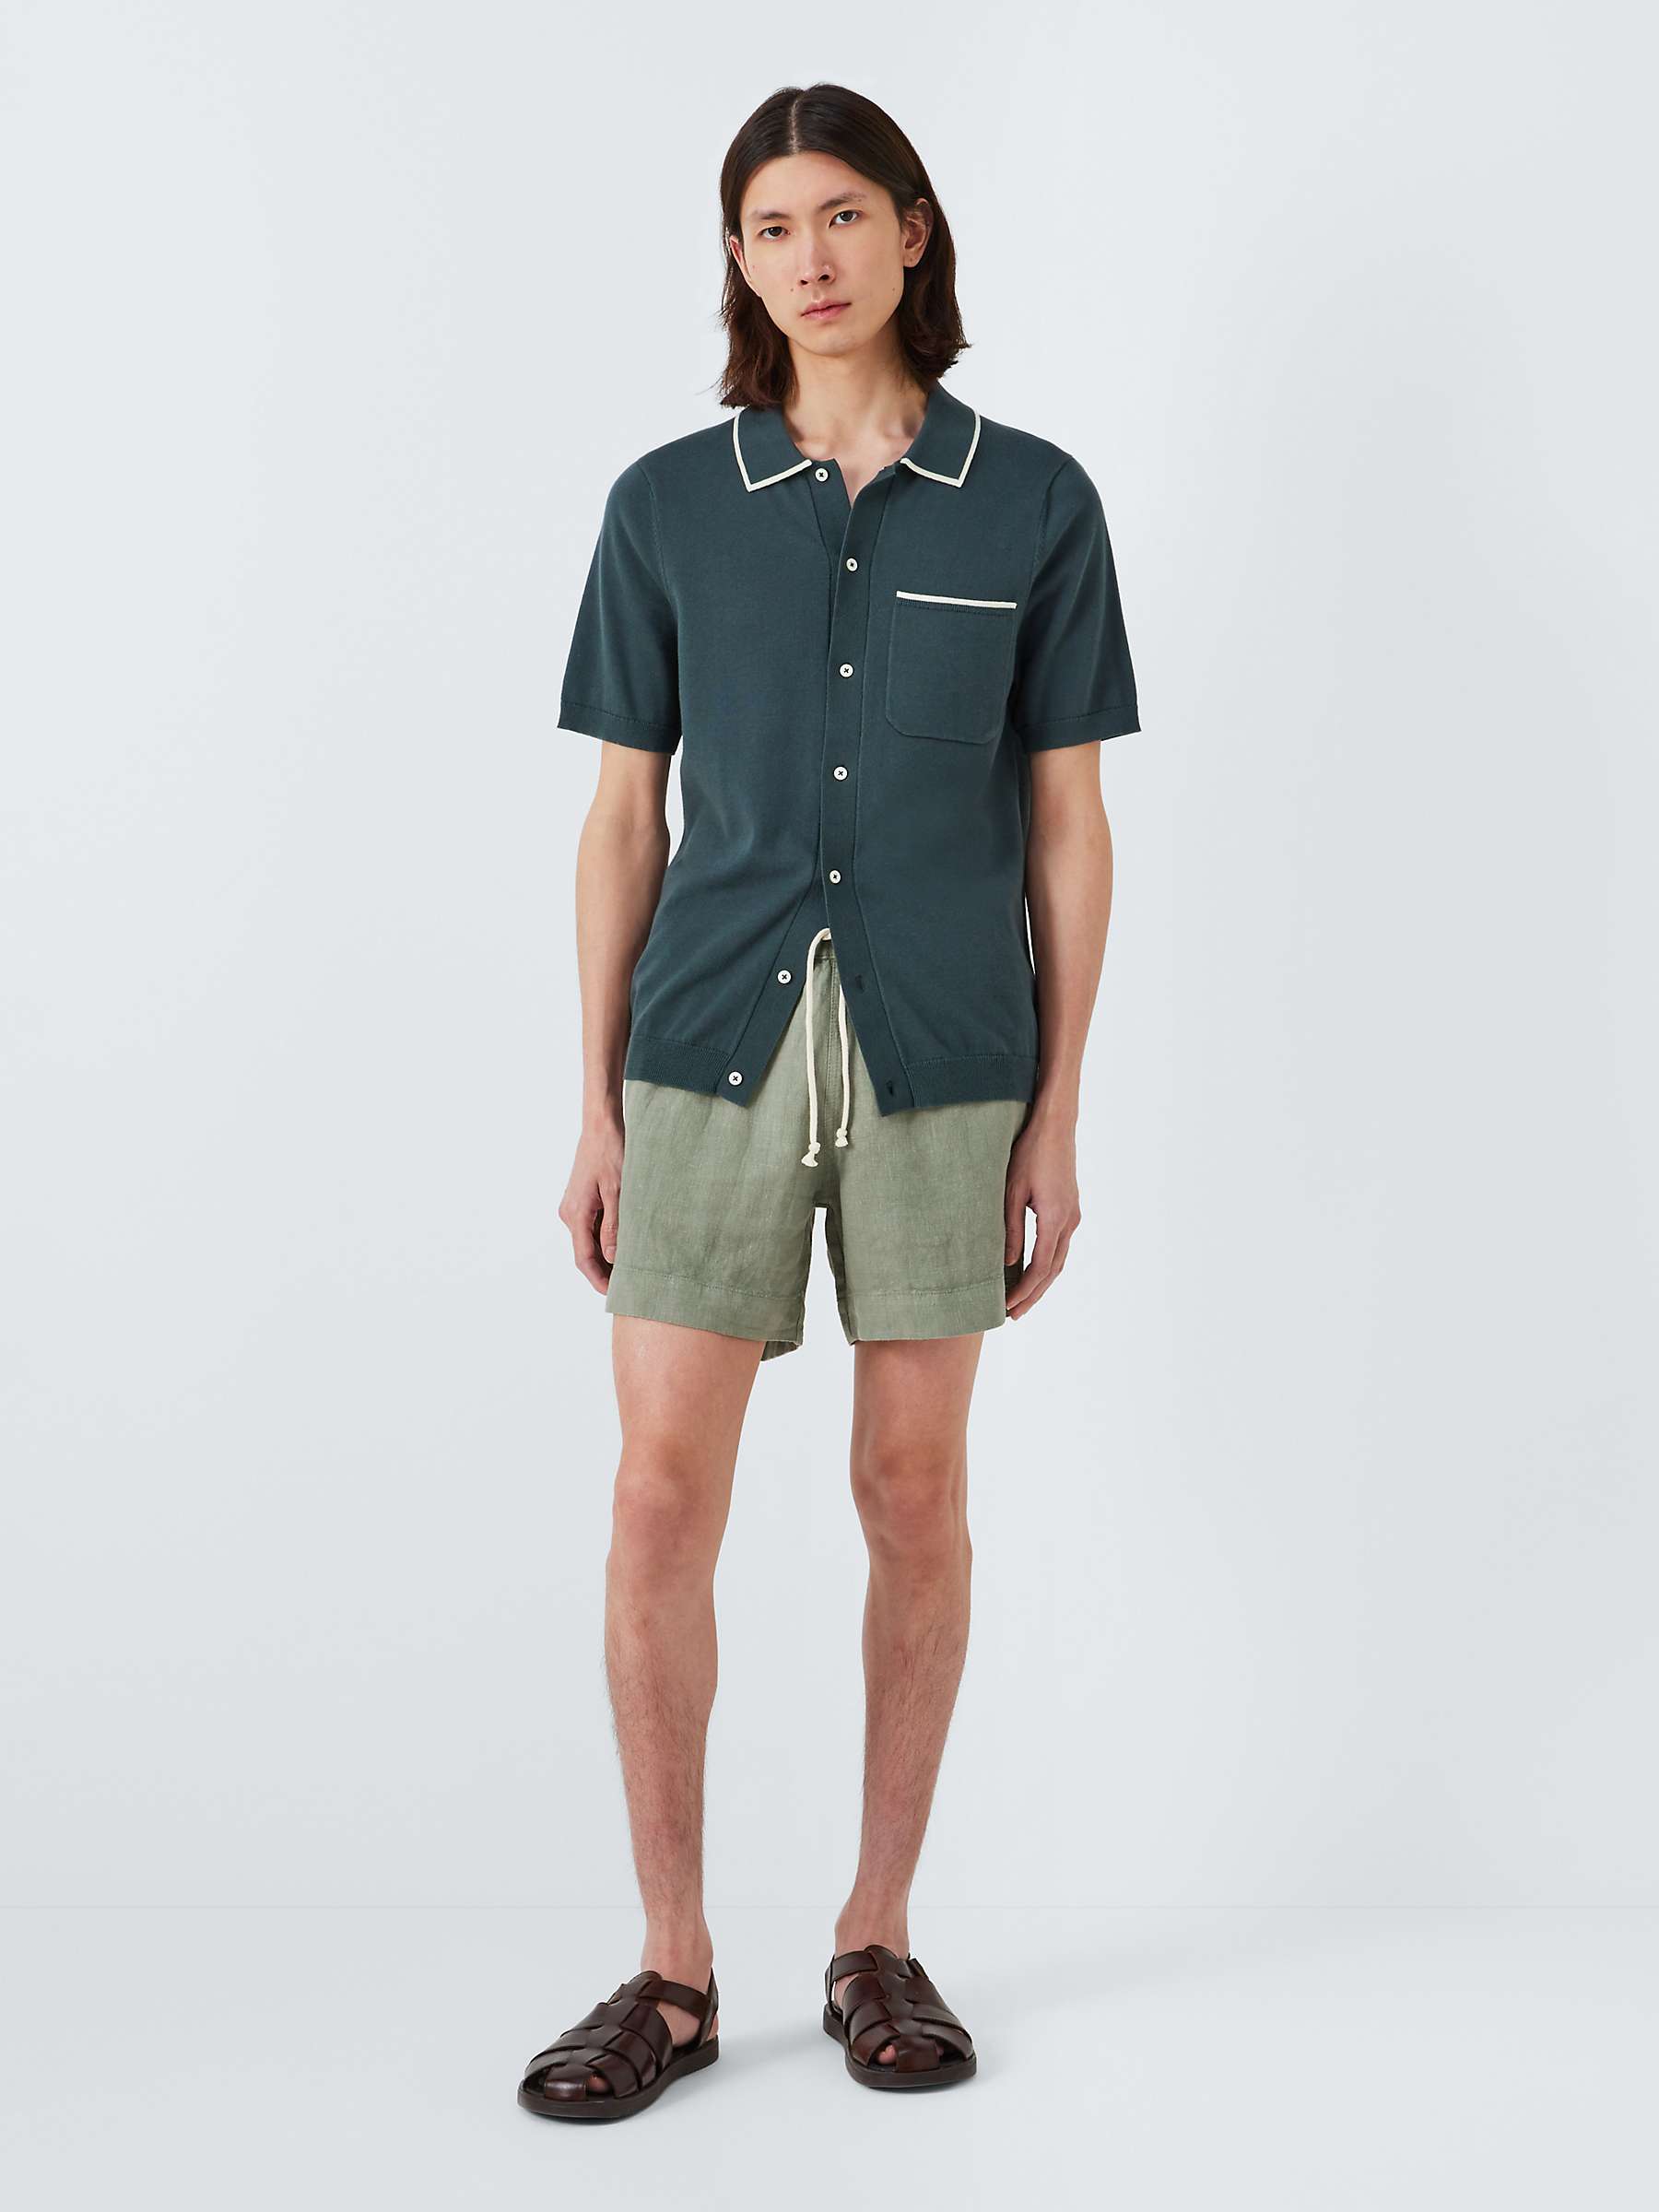 Buy La Paz Relaxed Linen Shorts Online at johnlewis.com